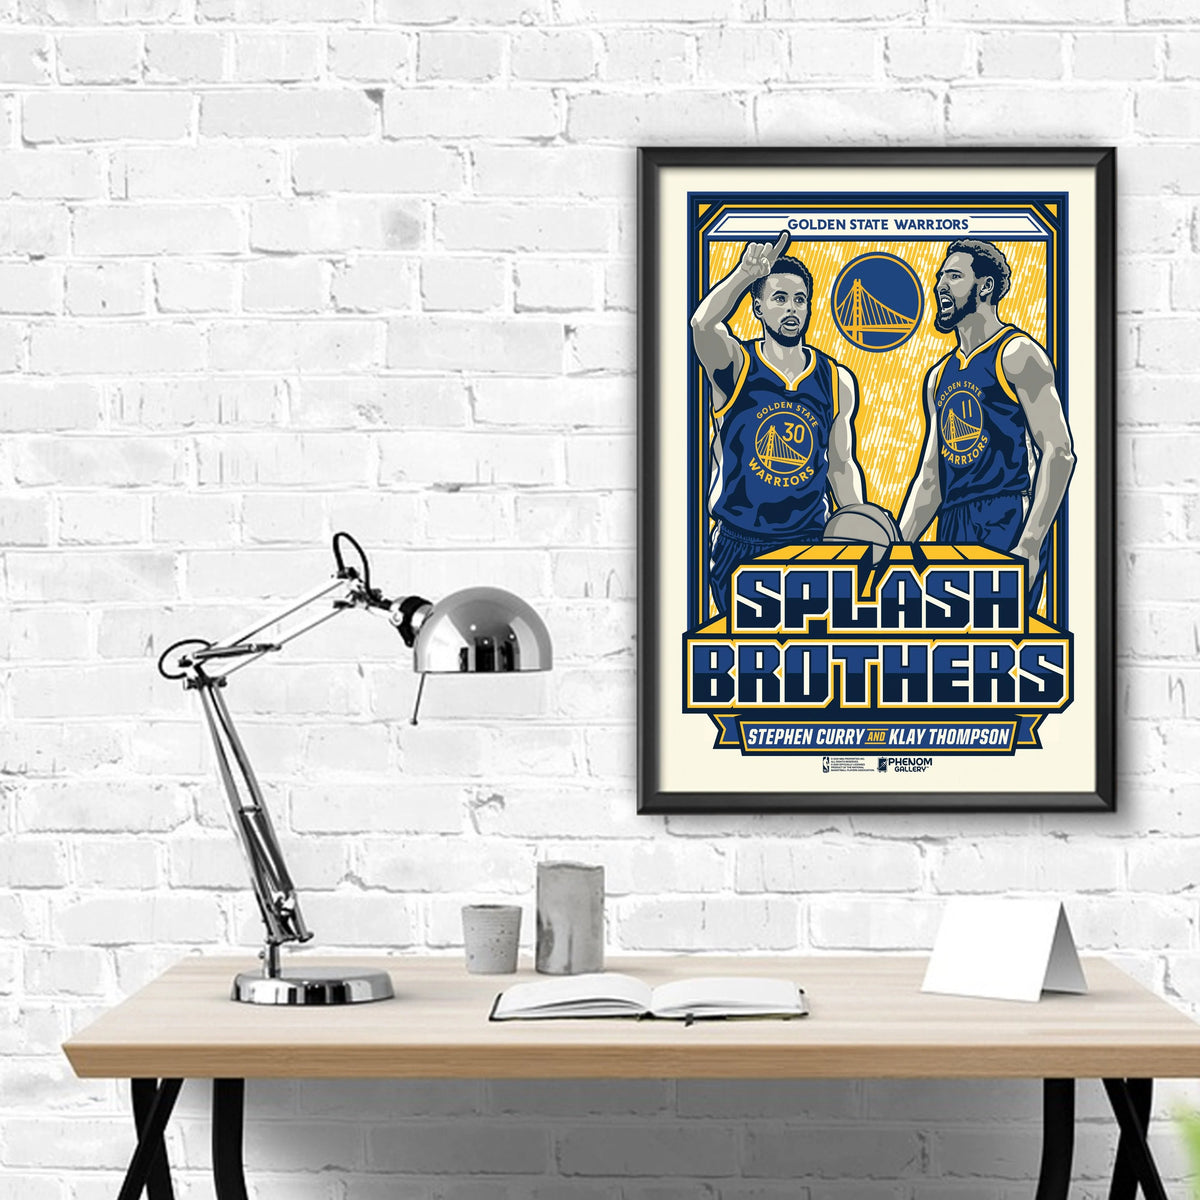 NBA Golden State Warriors Phenom Gallery Splash Brothers Limited Edition Deluxe Framed Serigraph